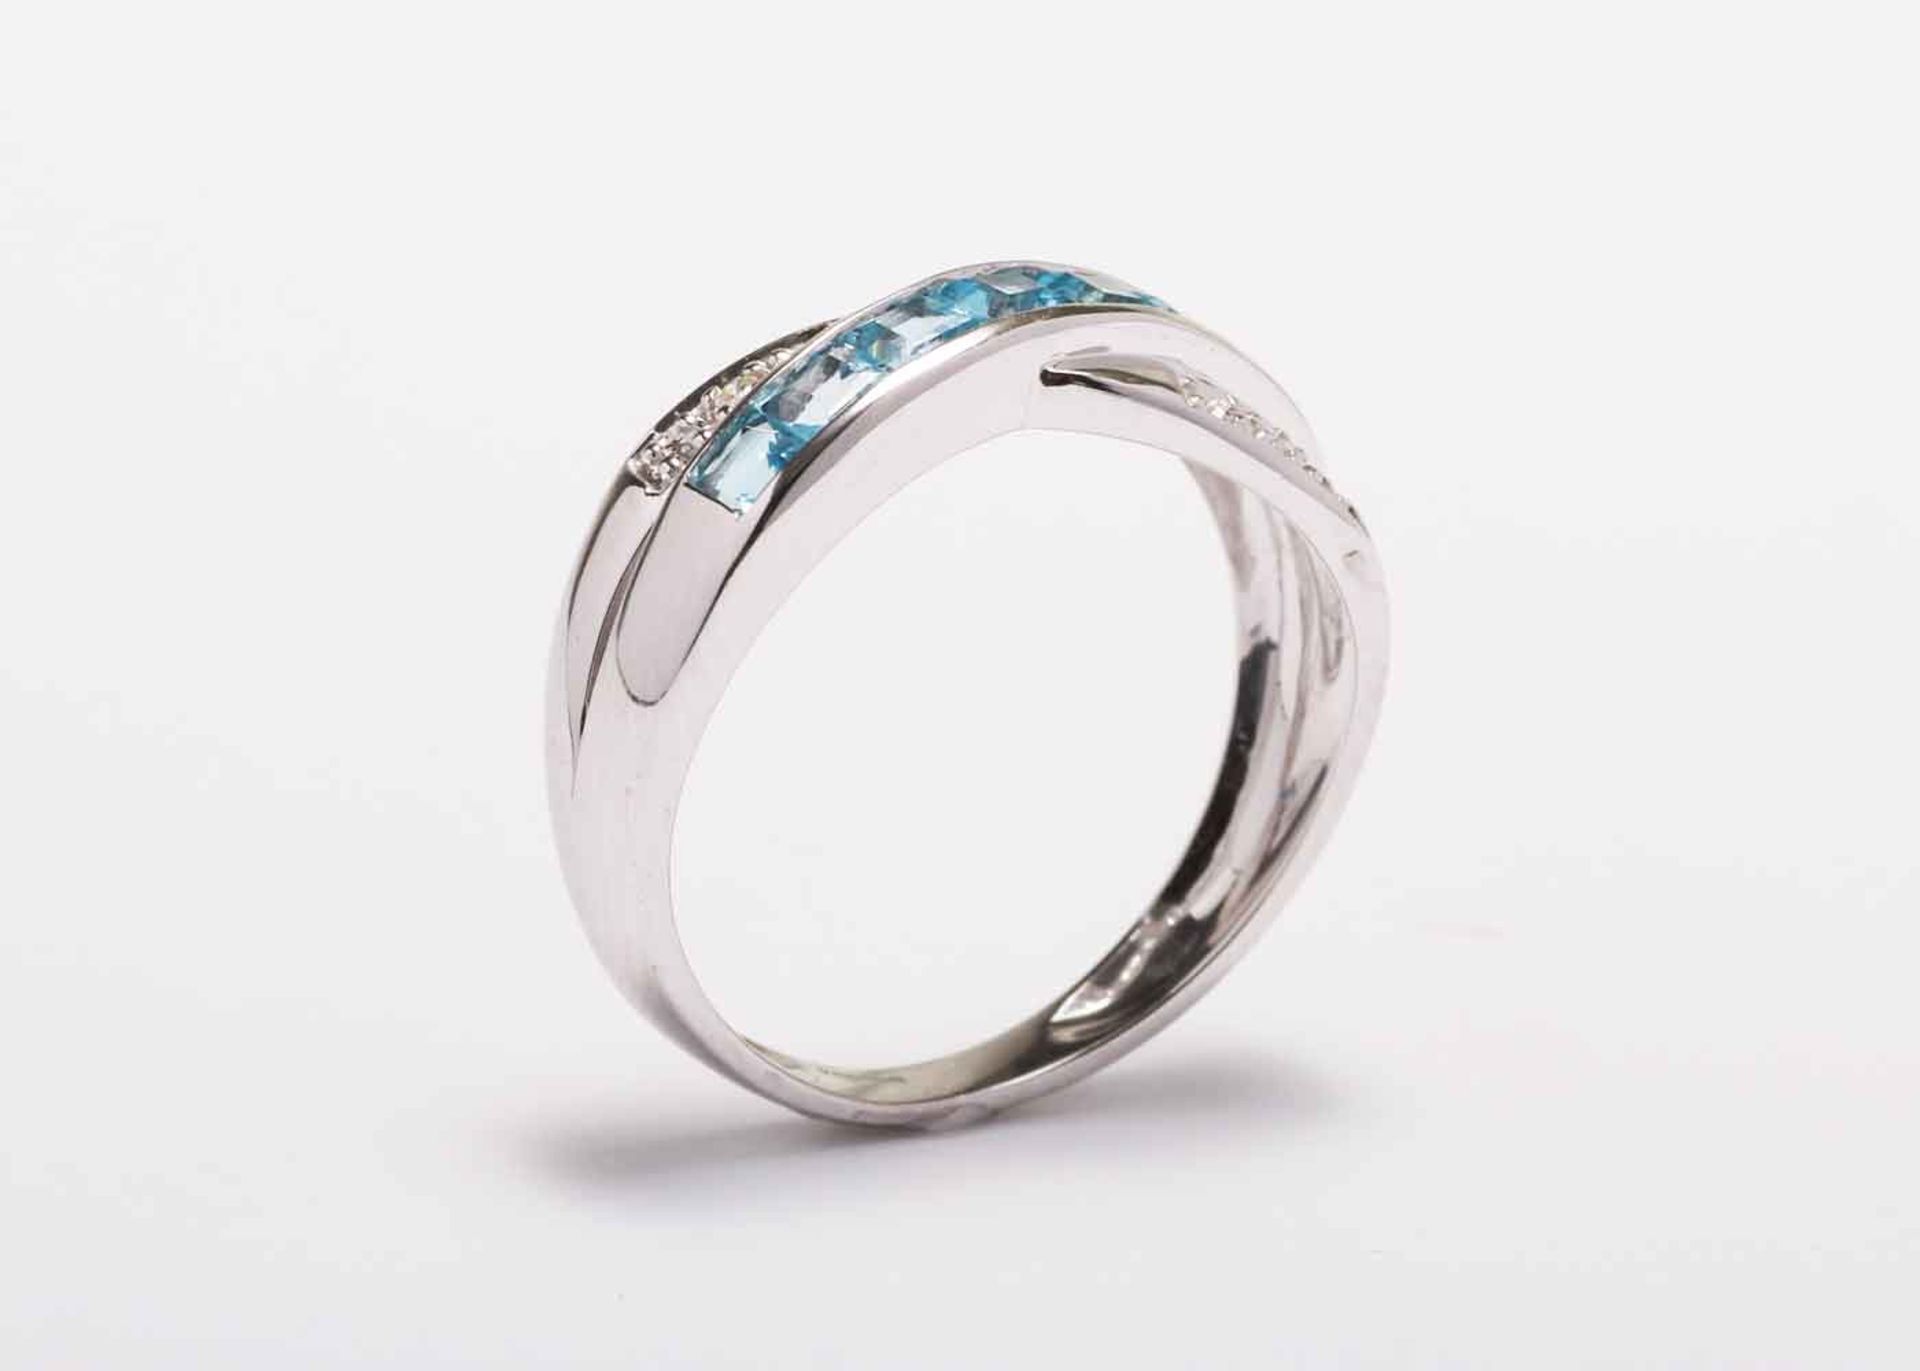 9ct White Gold Blue Topaz And Diamond Ring 0.06 Carats - Image 8 of 8